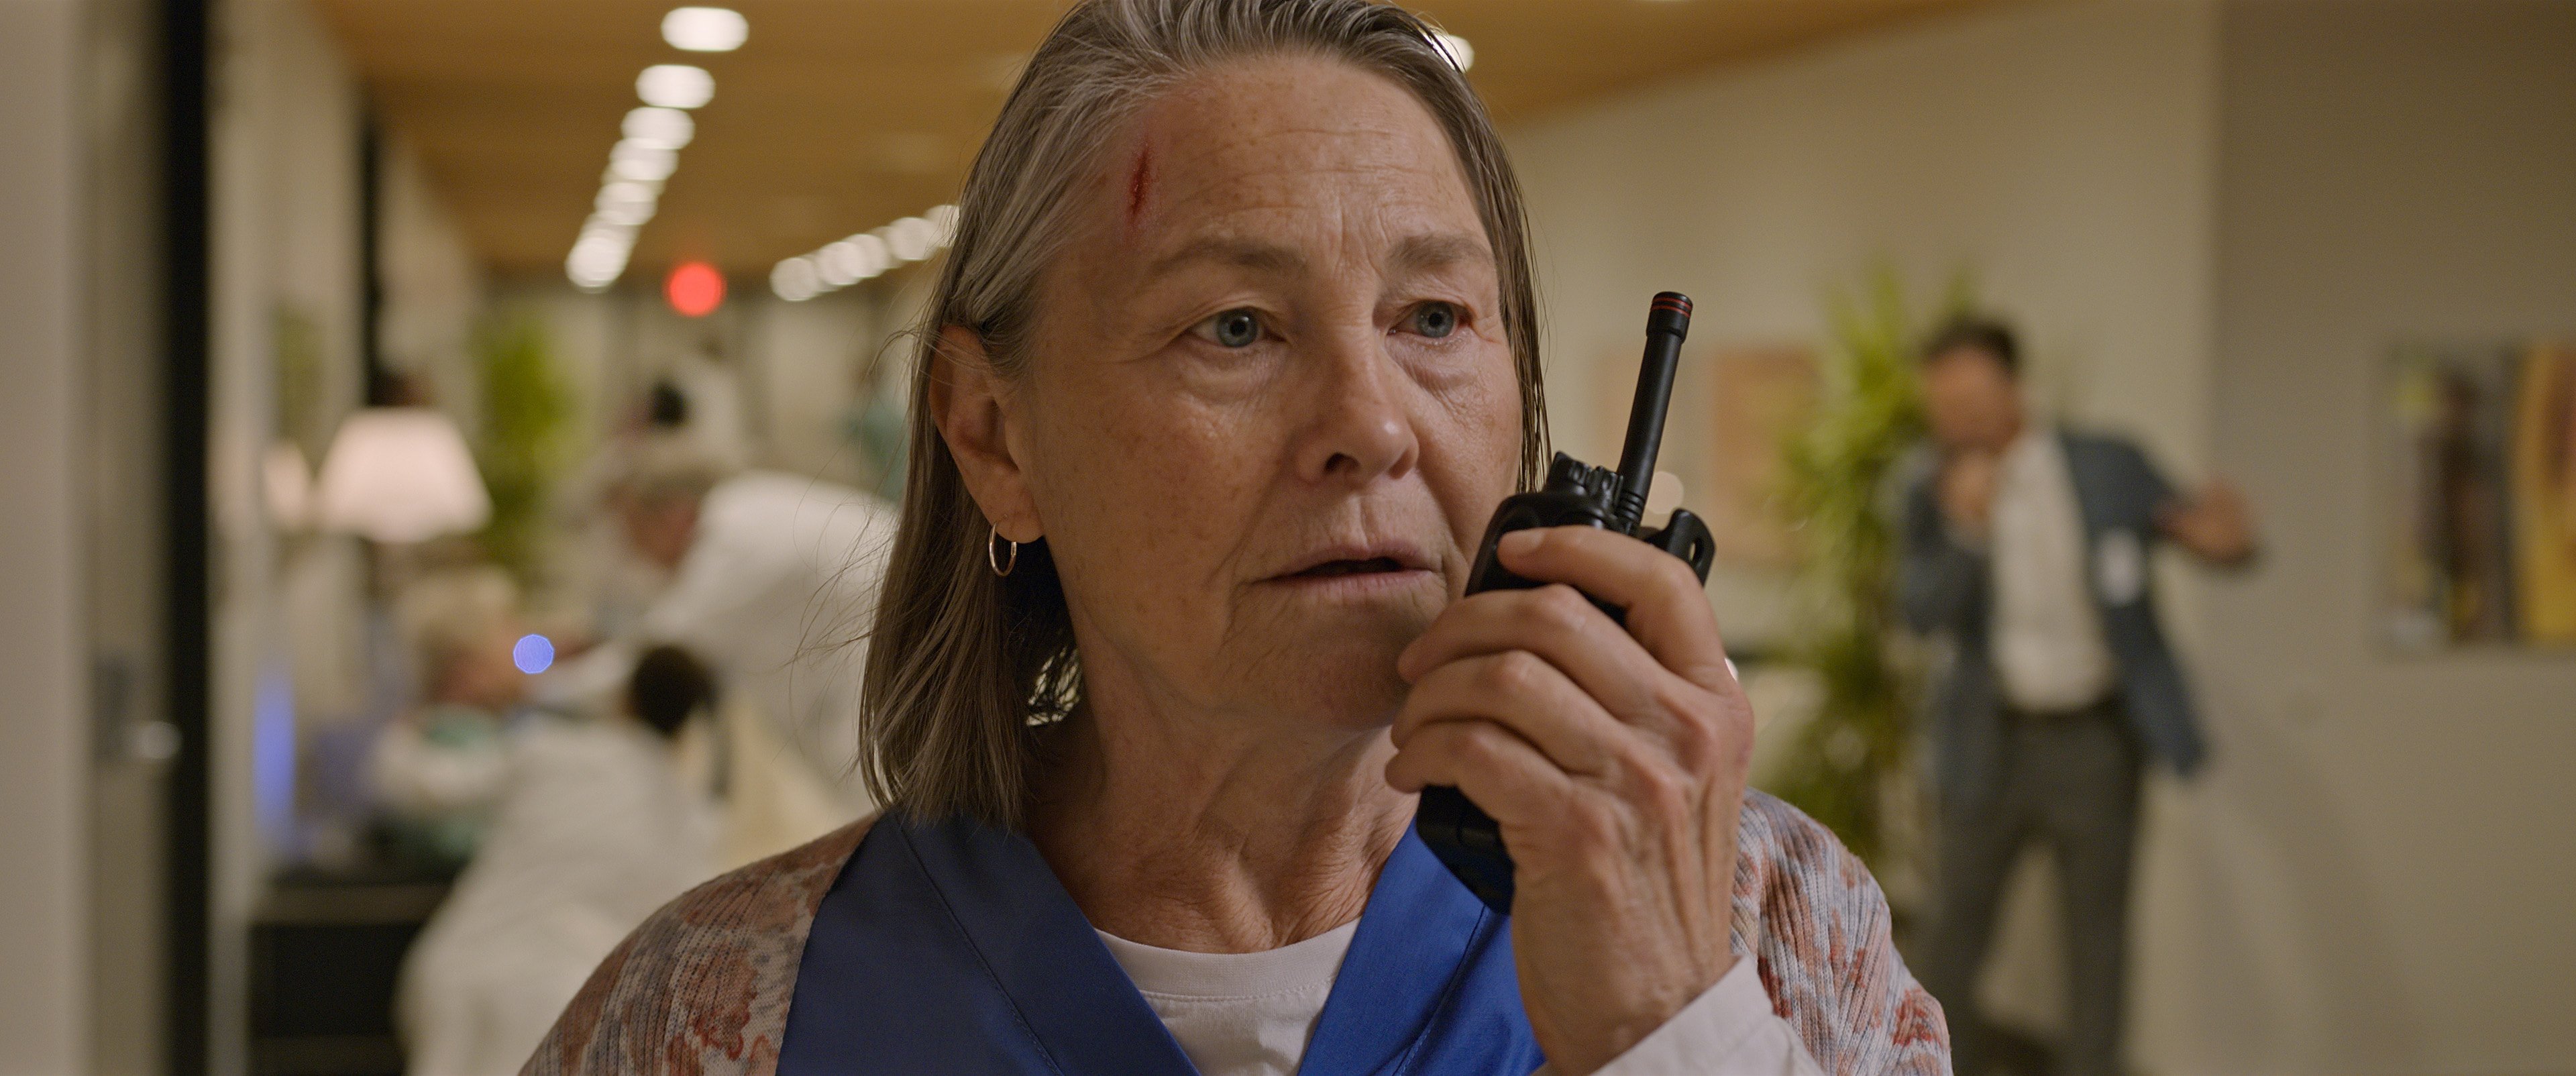 'Five Days At Memorial' cast member Cherry Jones talking into a walkie talkie with a bleeding cut on her head